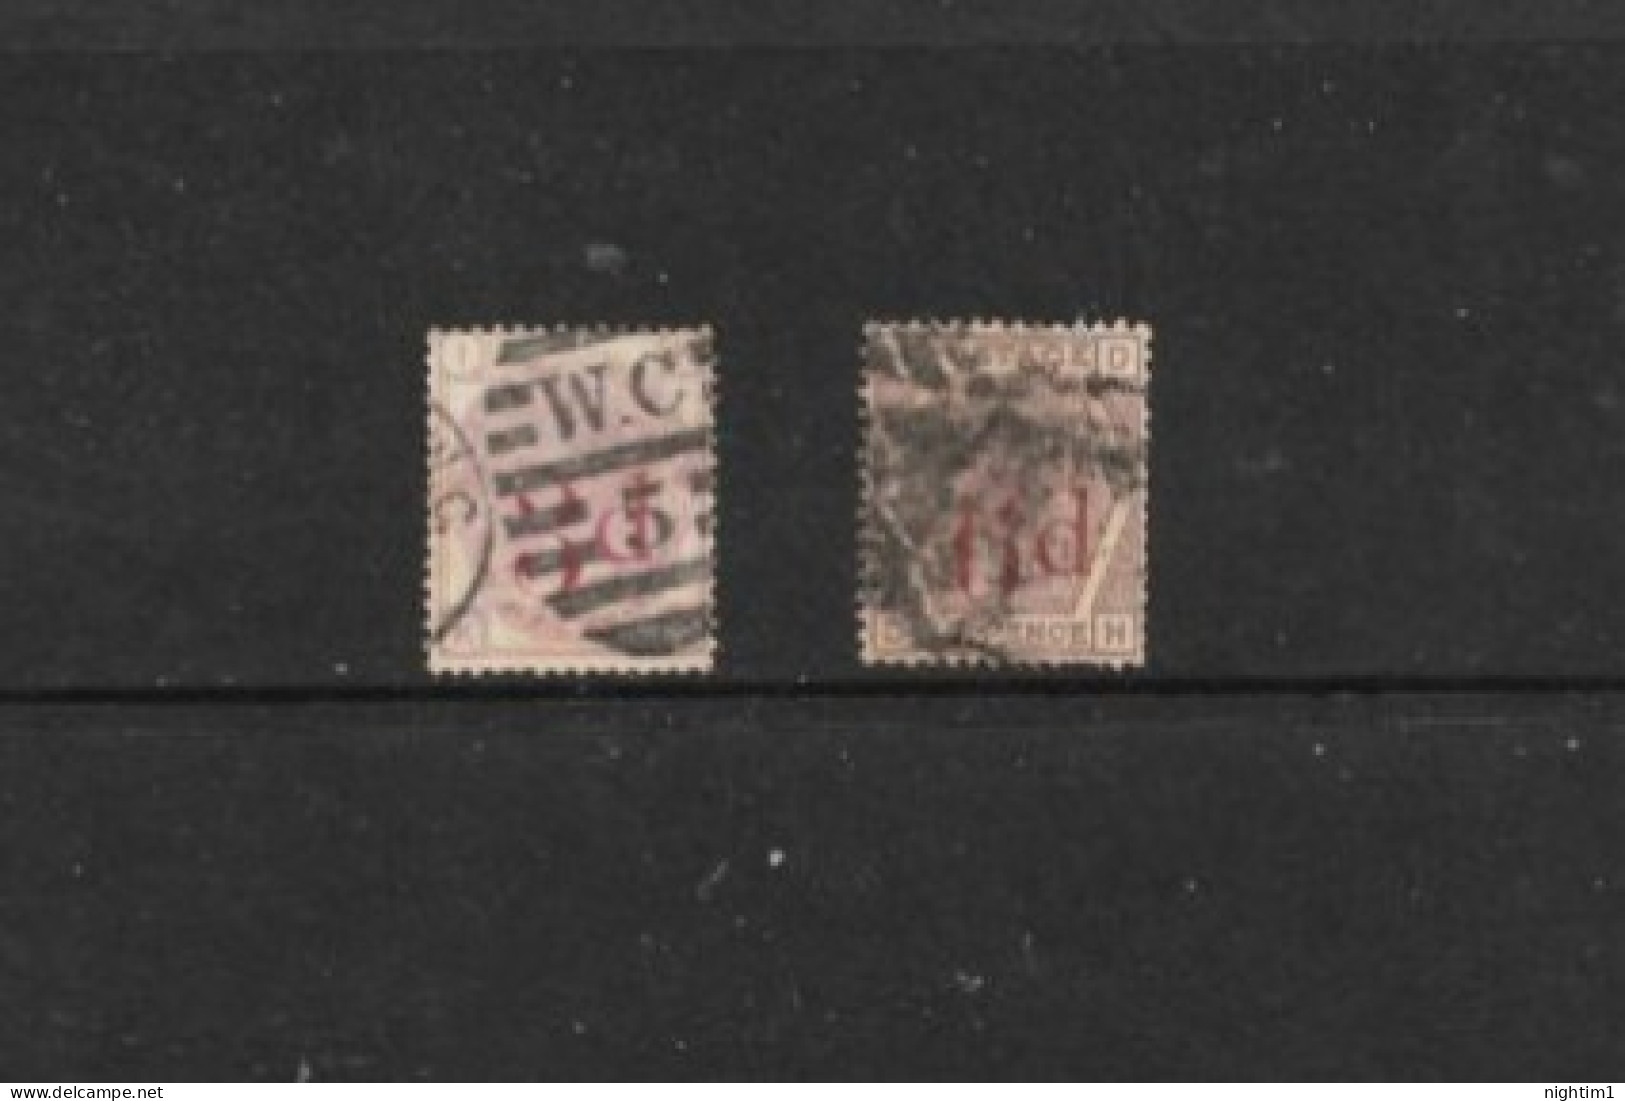 GREAT BRITAIN COLLECTION.  3d ON 3d AND 6d ON 6d. TWO STAMPS. - Used Stamps